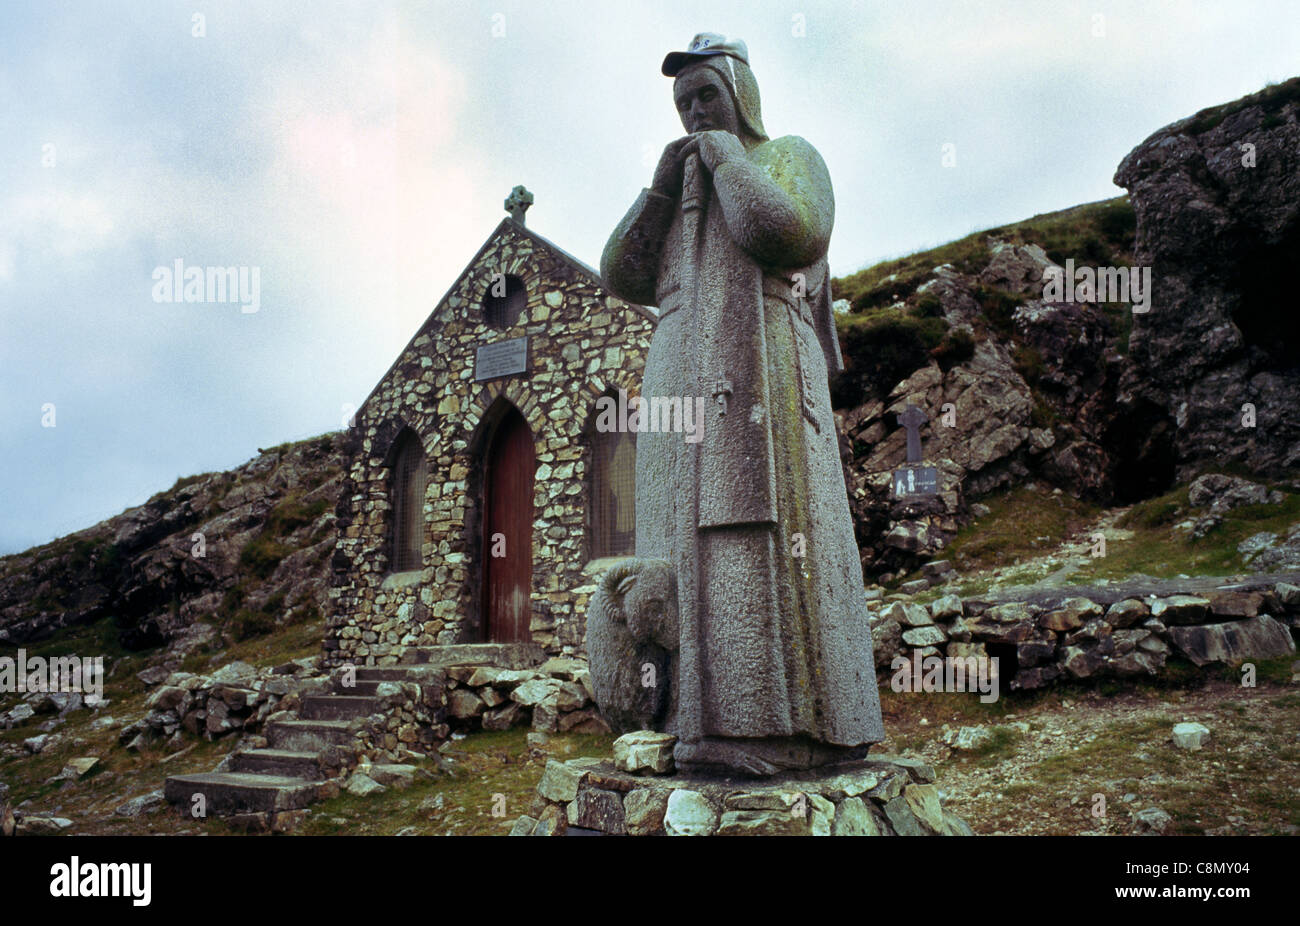 Statue of St Patrick Maam Ean Connemara National Park Maamturk Mountains County Galway Ireland Westernmost point of the journeys of St. Patrick 5th Century When St Patrick spent the night here, a well of holy water sprang Stock Photo